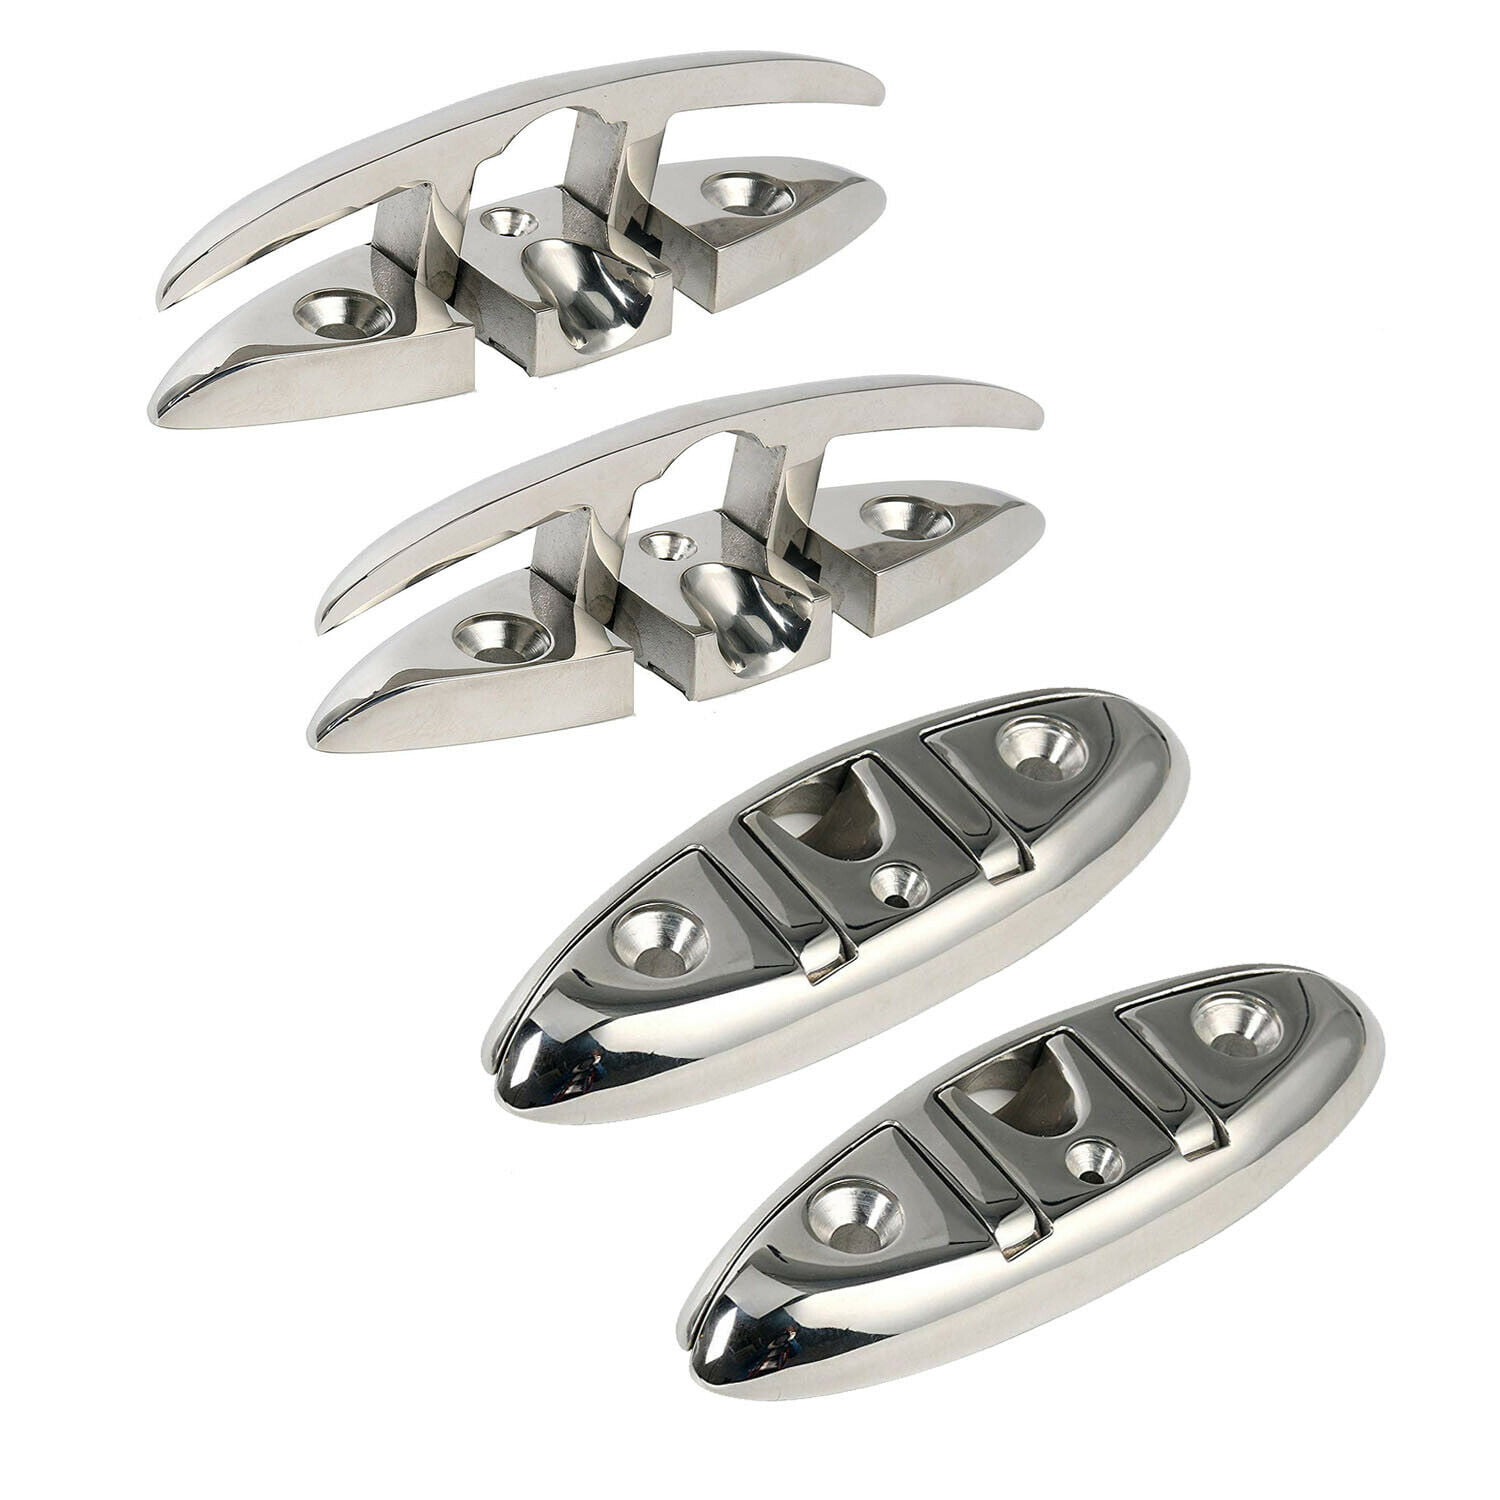 Flip-up Dock Cleat Marine with Screw no branded 6 inchs 316 Stainless Steel Folding Cleat 